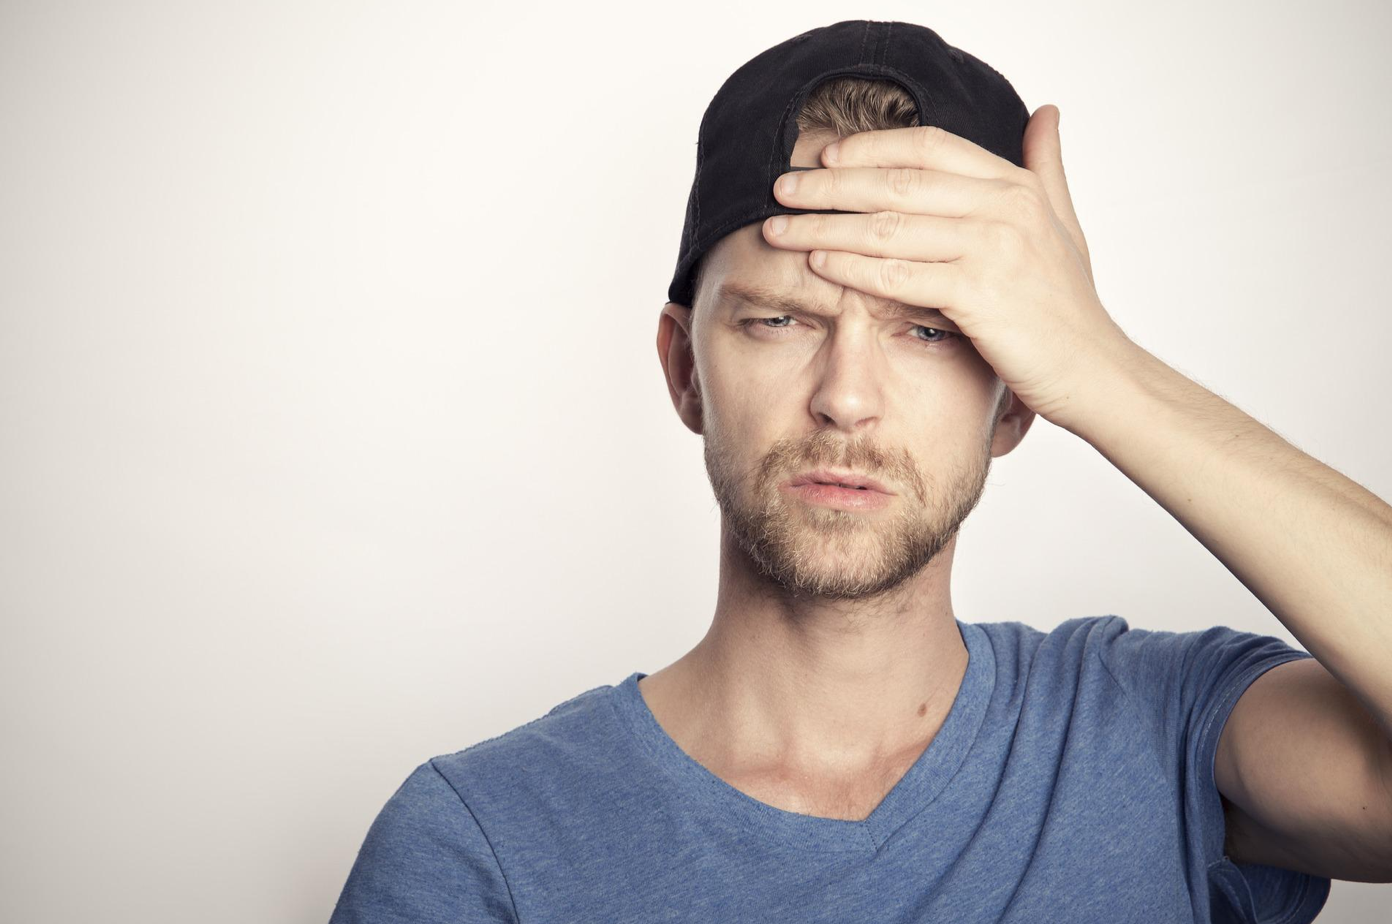 Man in t-shirt with backward ball cap and hand on forehead; image by 10634669, via Pixabay.com.